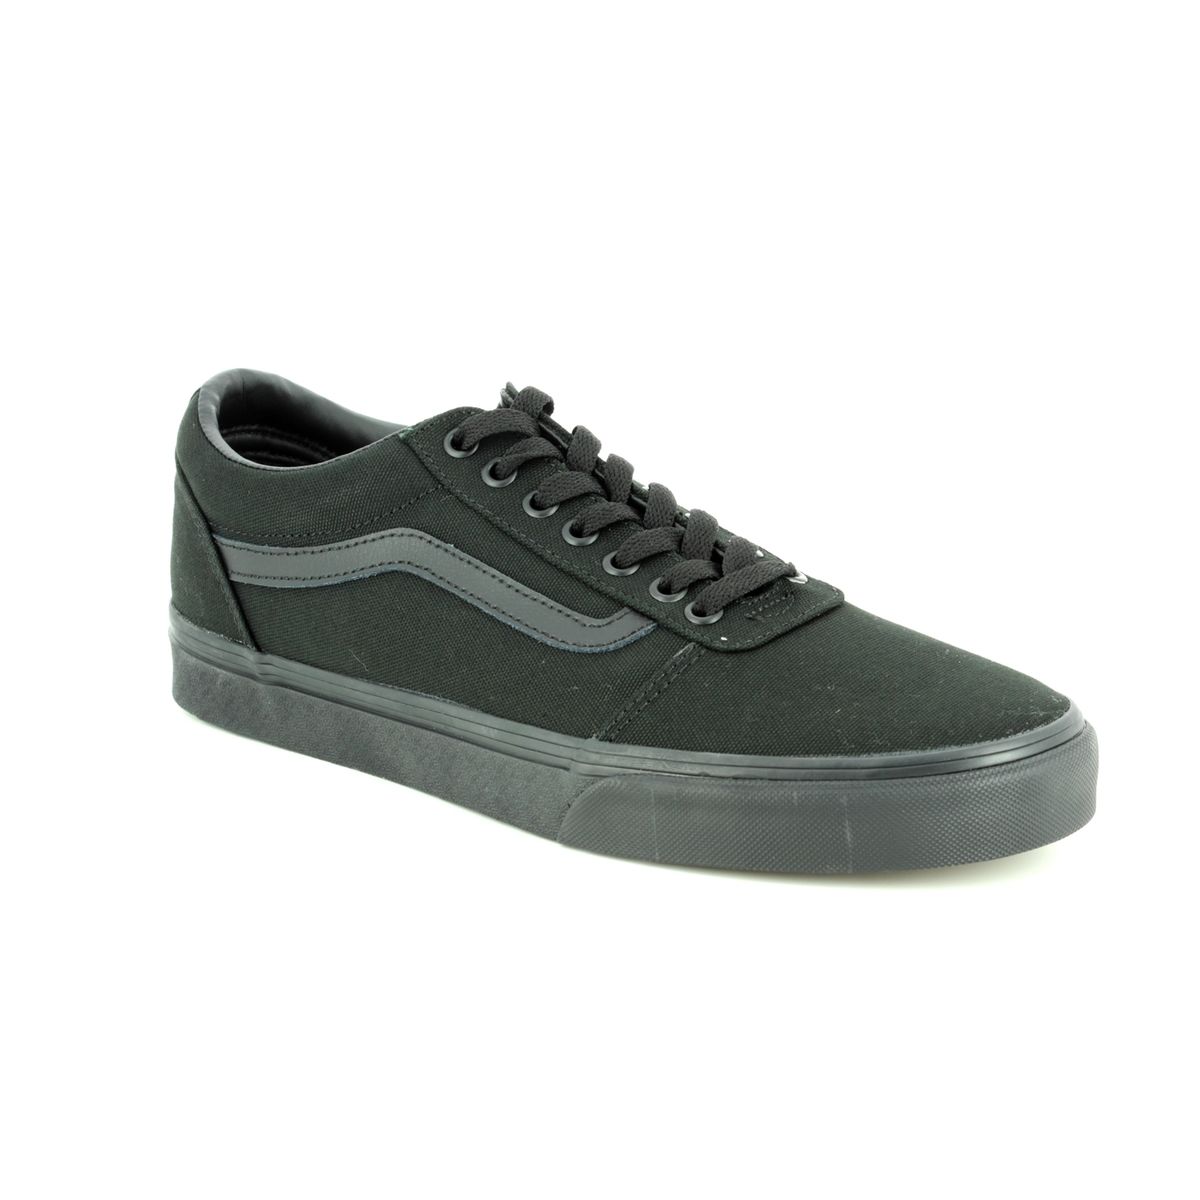 Vans Ward Black Mens trainers VN0A38DM1-861 in a Plain Canvas in Size 9